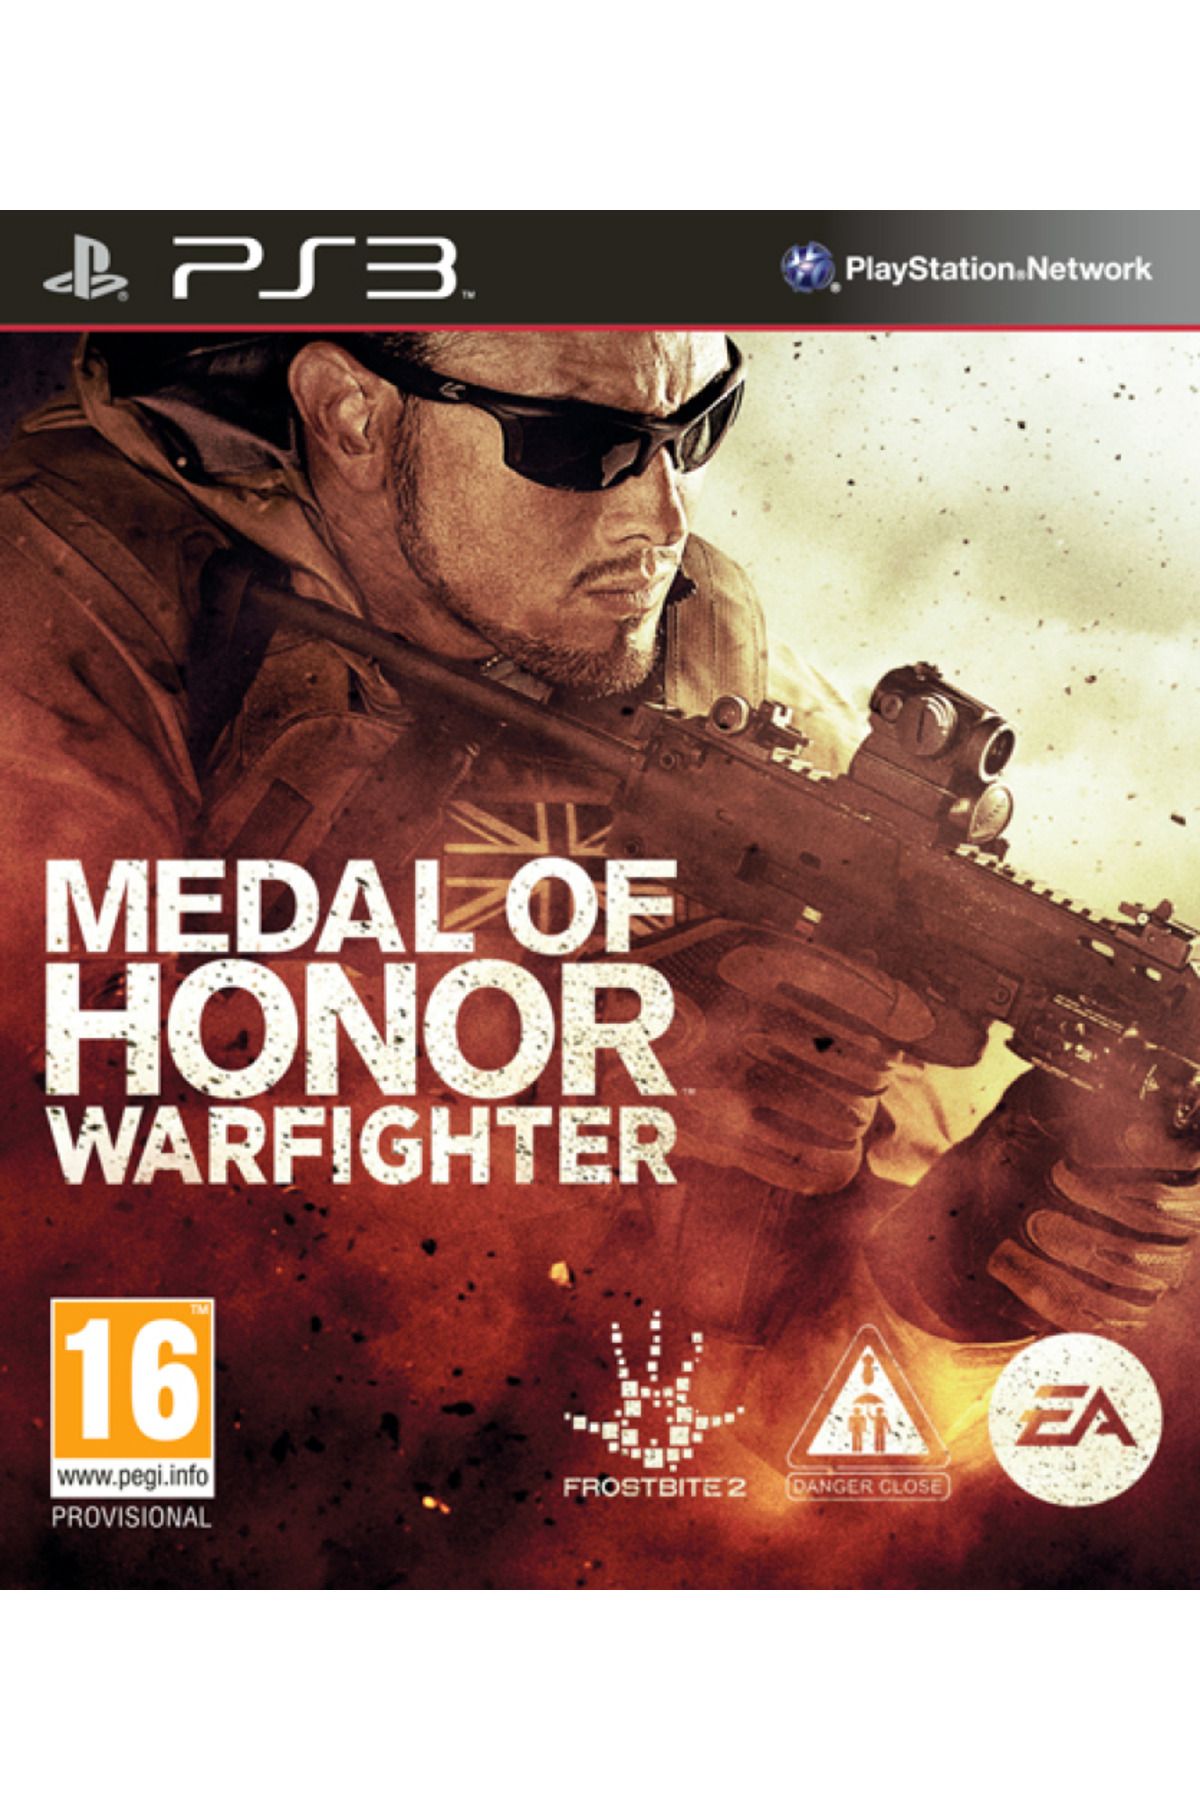 Medal of Honor: Warfighter [ps3, русская версия]. Medal of Honor пс3. Medal of Honor на PLAYSTATION 3. Medal of Honor Limited Edition ps3. Medal of honor 3